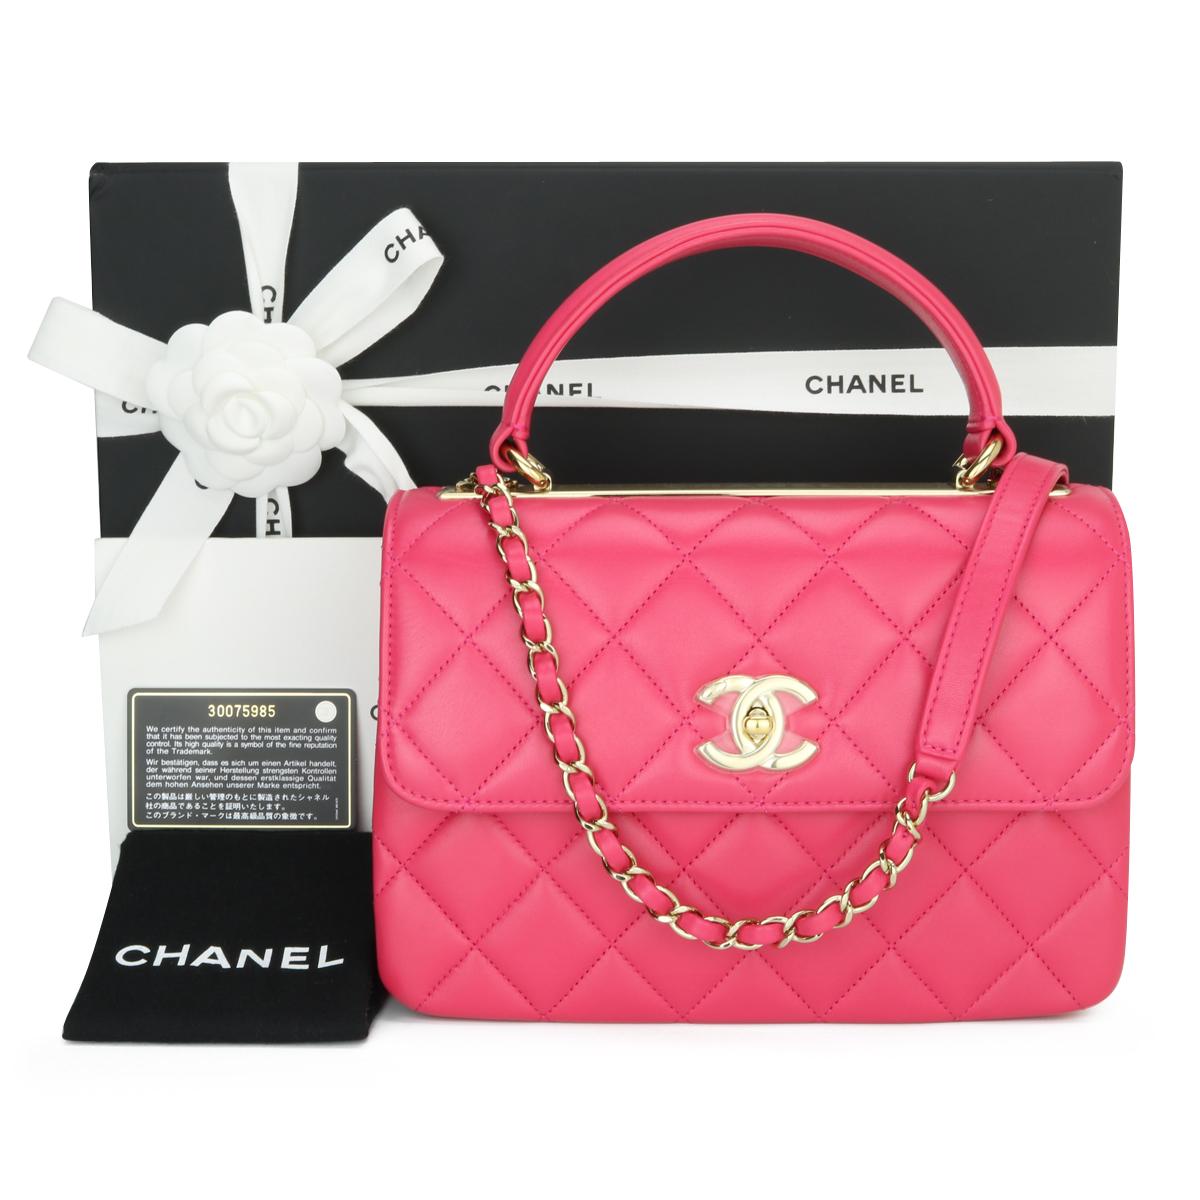 CHANEL Trendy CC Top Handle Bag Small Pink Quilted Lambskin with Light Gold Hardware 2020.

This stunning bag is in as-new condition, the bag still holds its original shape, and the hardware is still very shiny. The leather smells fresh as if